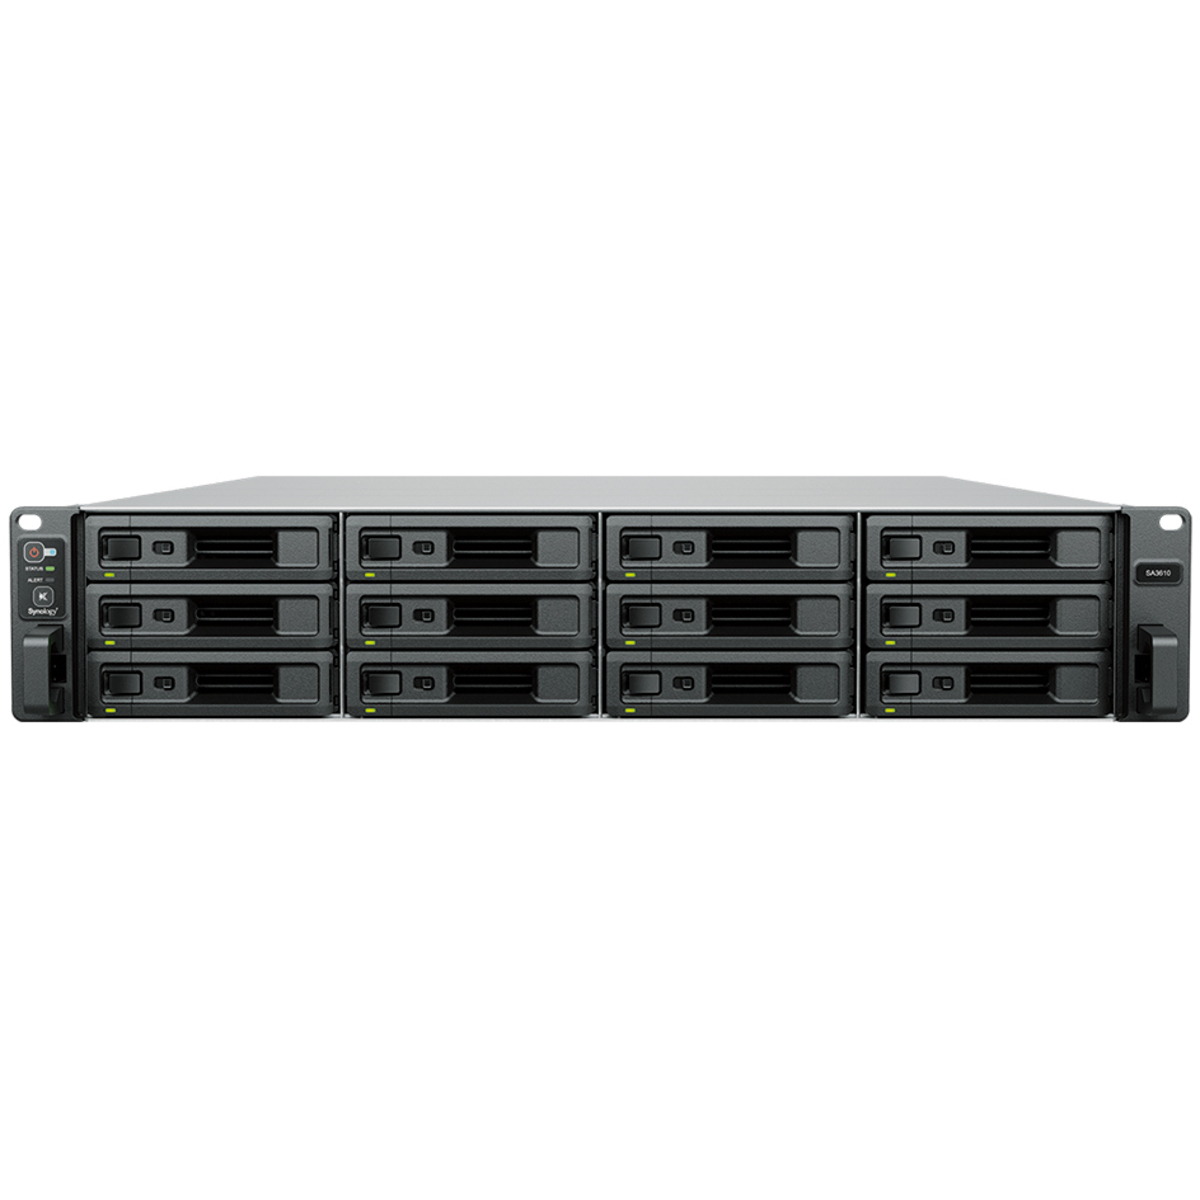 Synology RackStation SA3410 RackMount 12-Bay Large Business / Enterprise NAS - Network Attached Storage Device Burn-In Tested Configurations RackStation SA3410